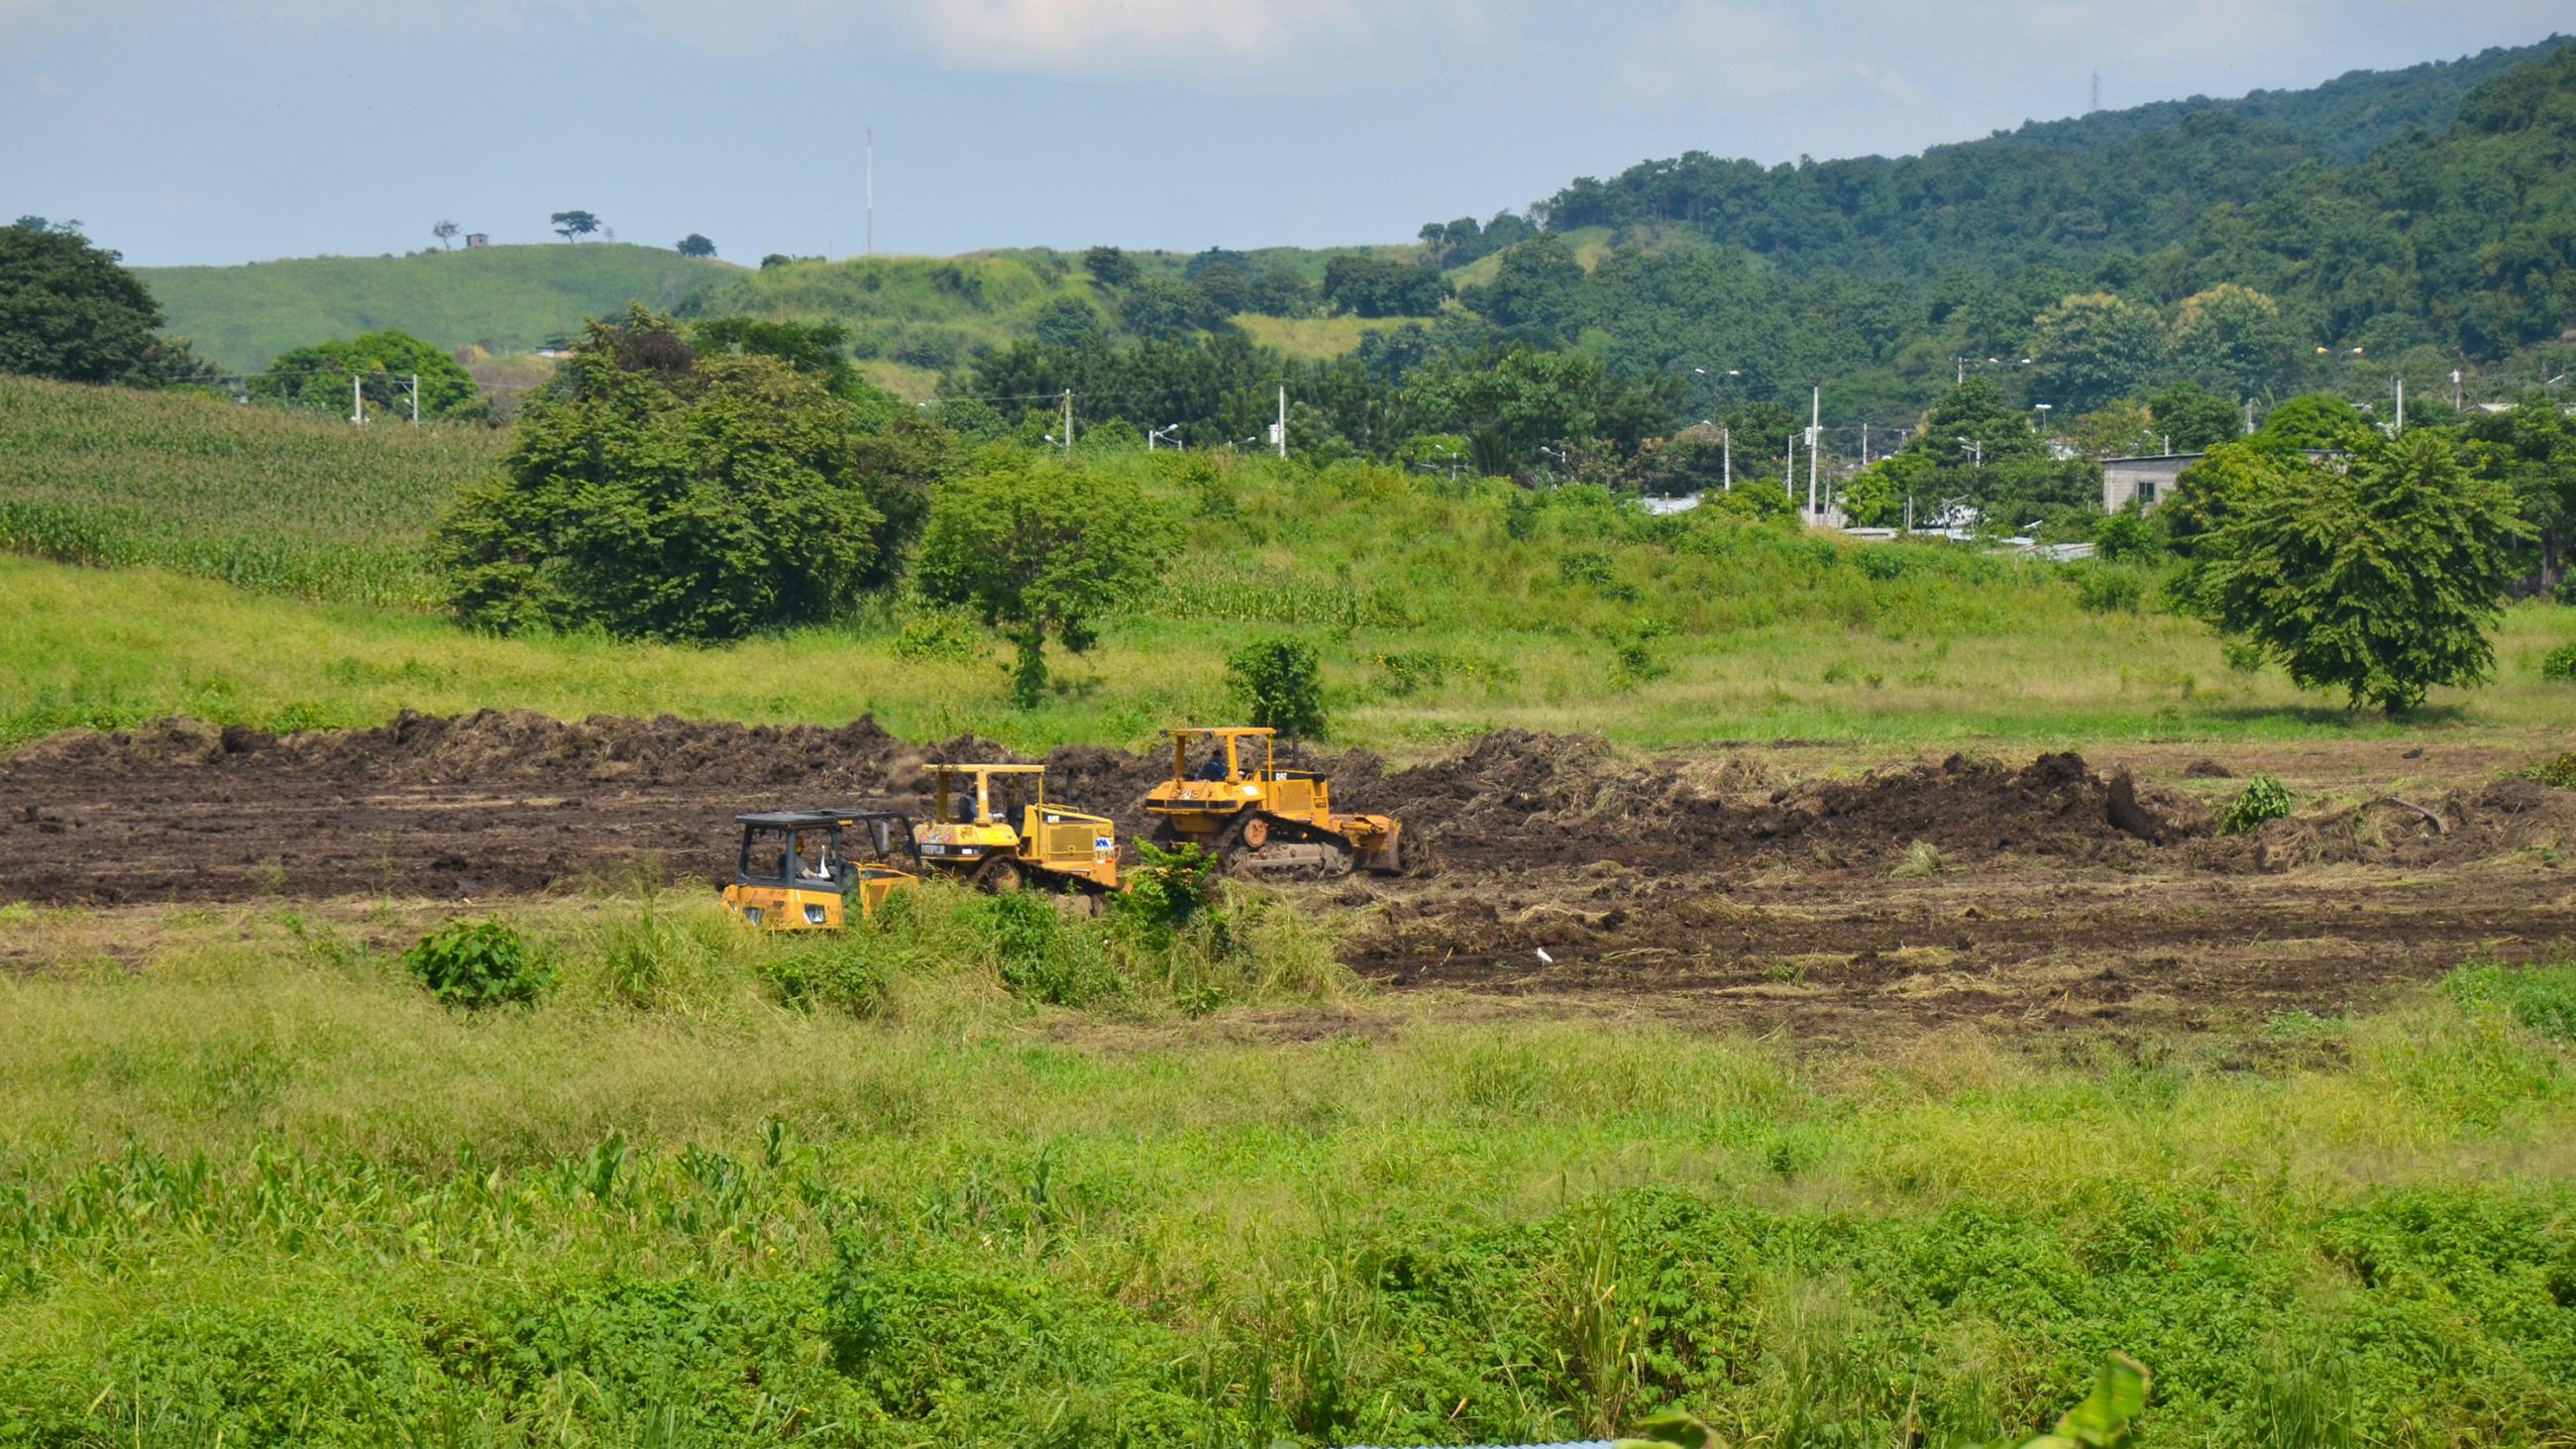 Picture shows a lush green landscape with some heavy machines clearing the ground. 